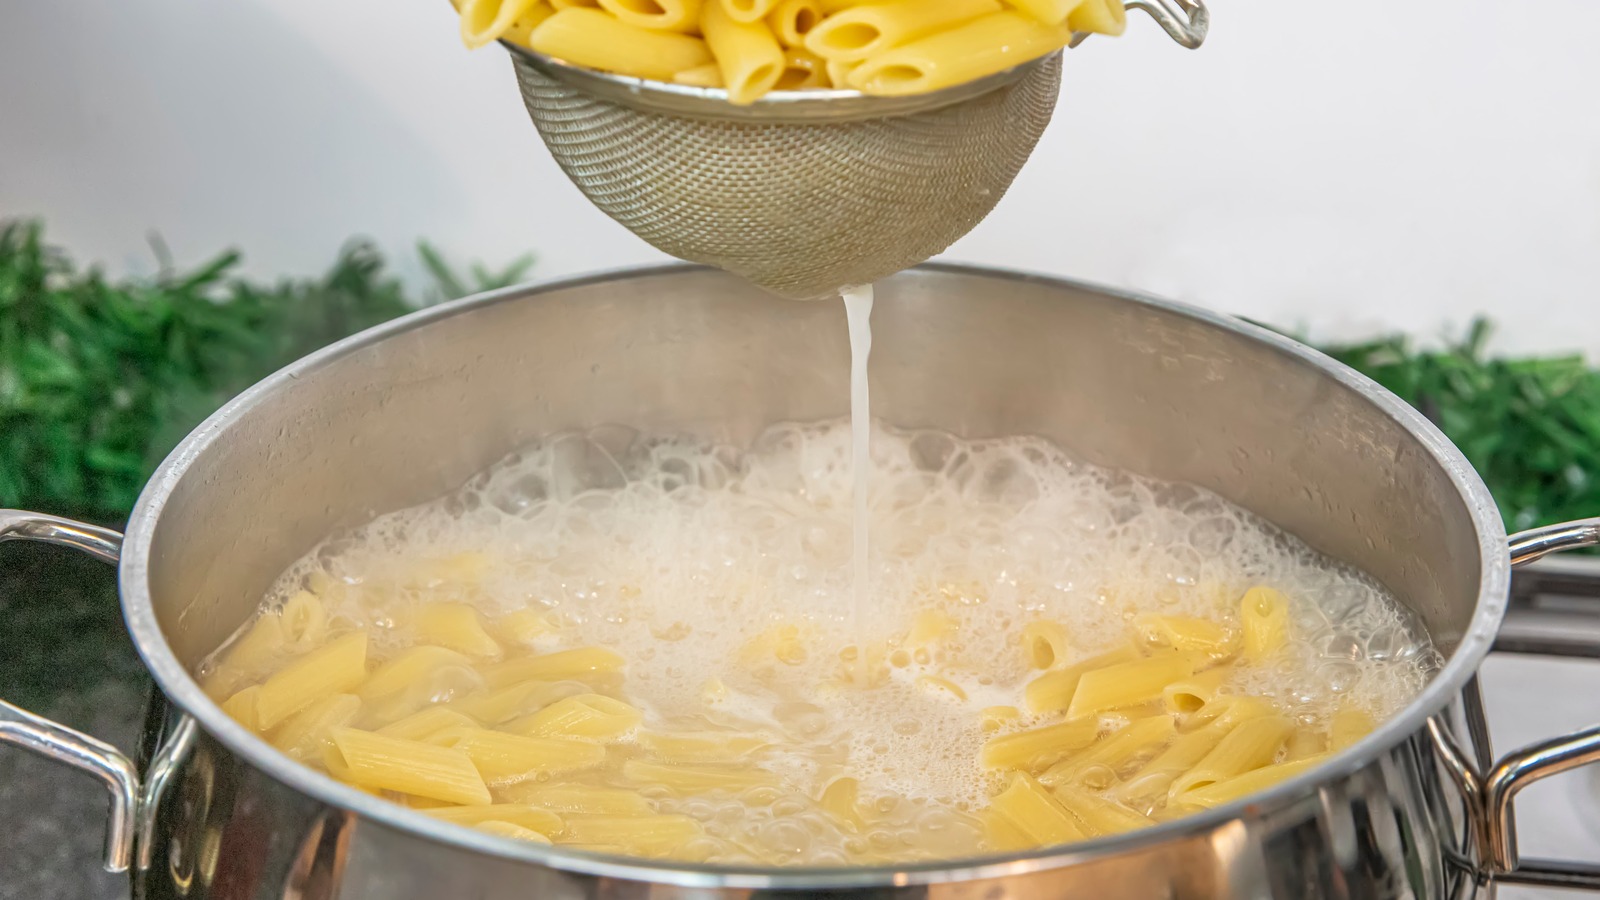 13 Uses For Leftover Pasta Water You Need To Know